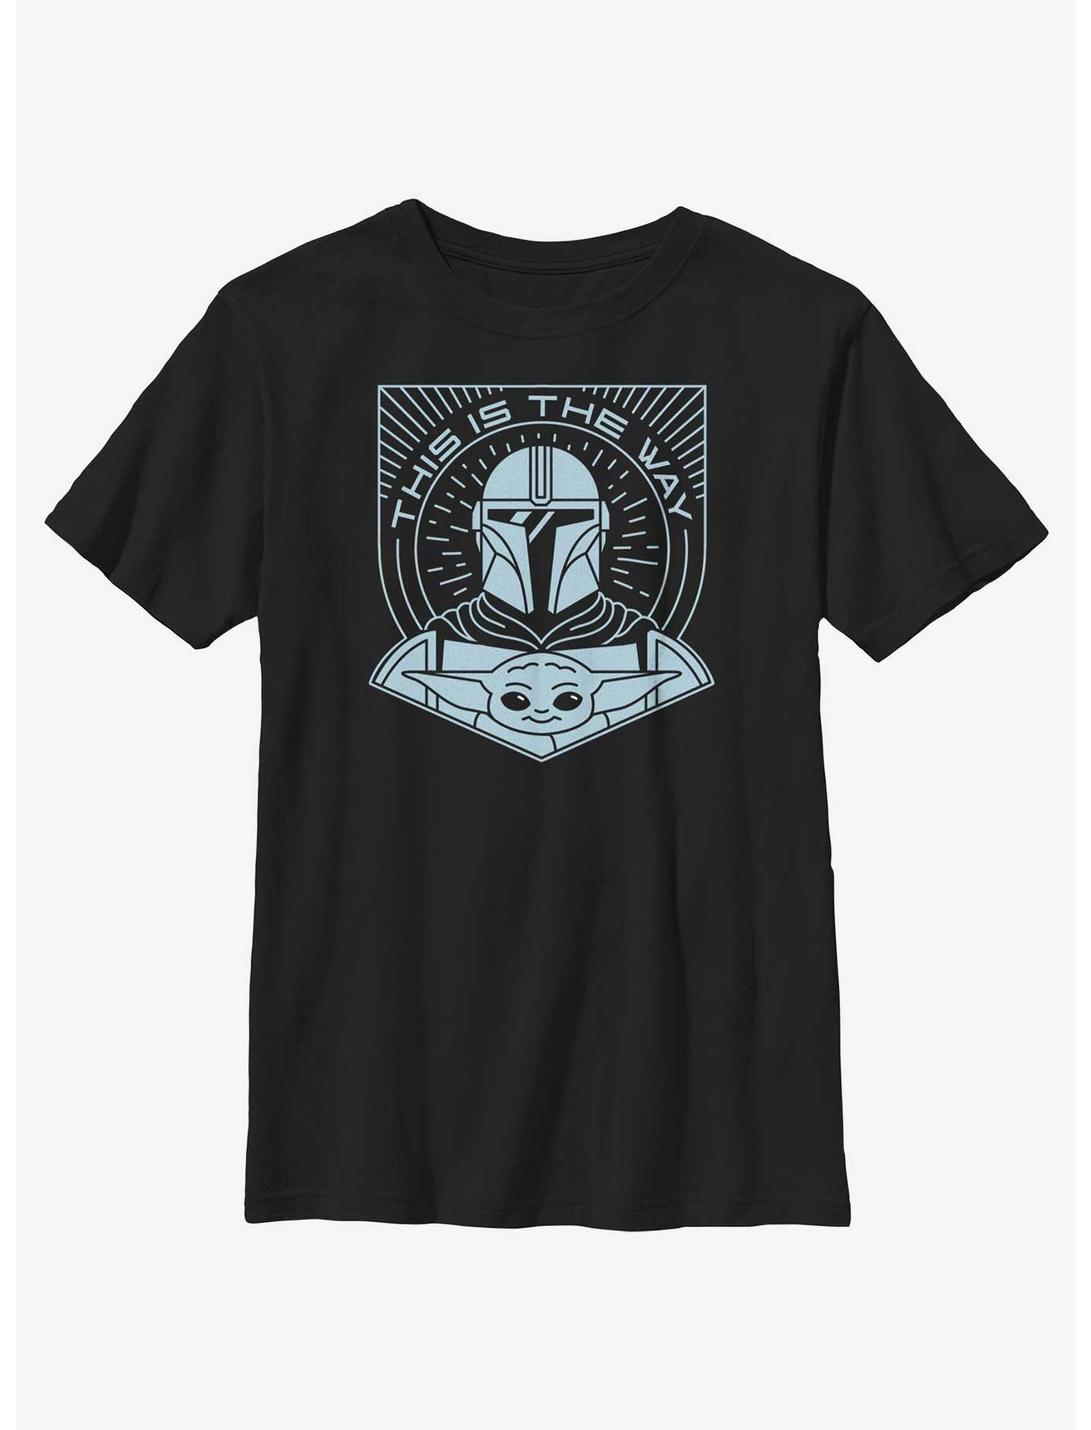 Star Wars The Mandalorian This Is The Way Line Art Youth T-Shirt, BLACK, hi-res